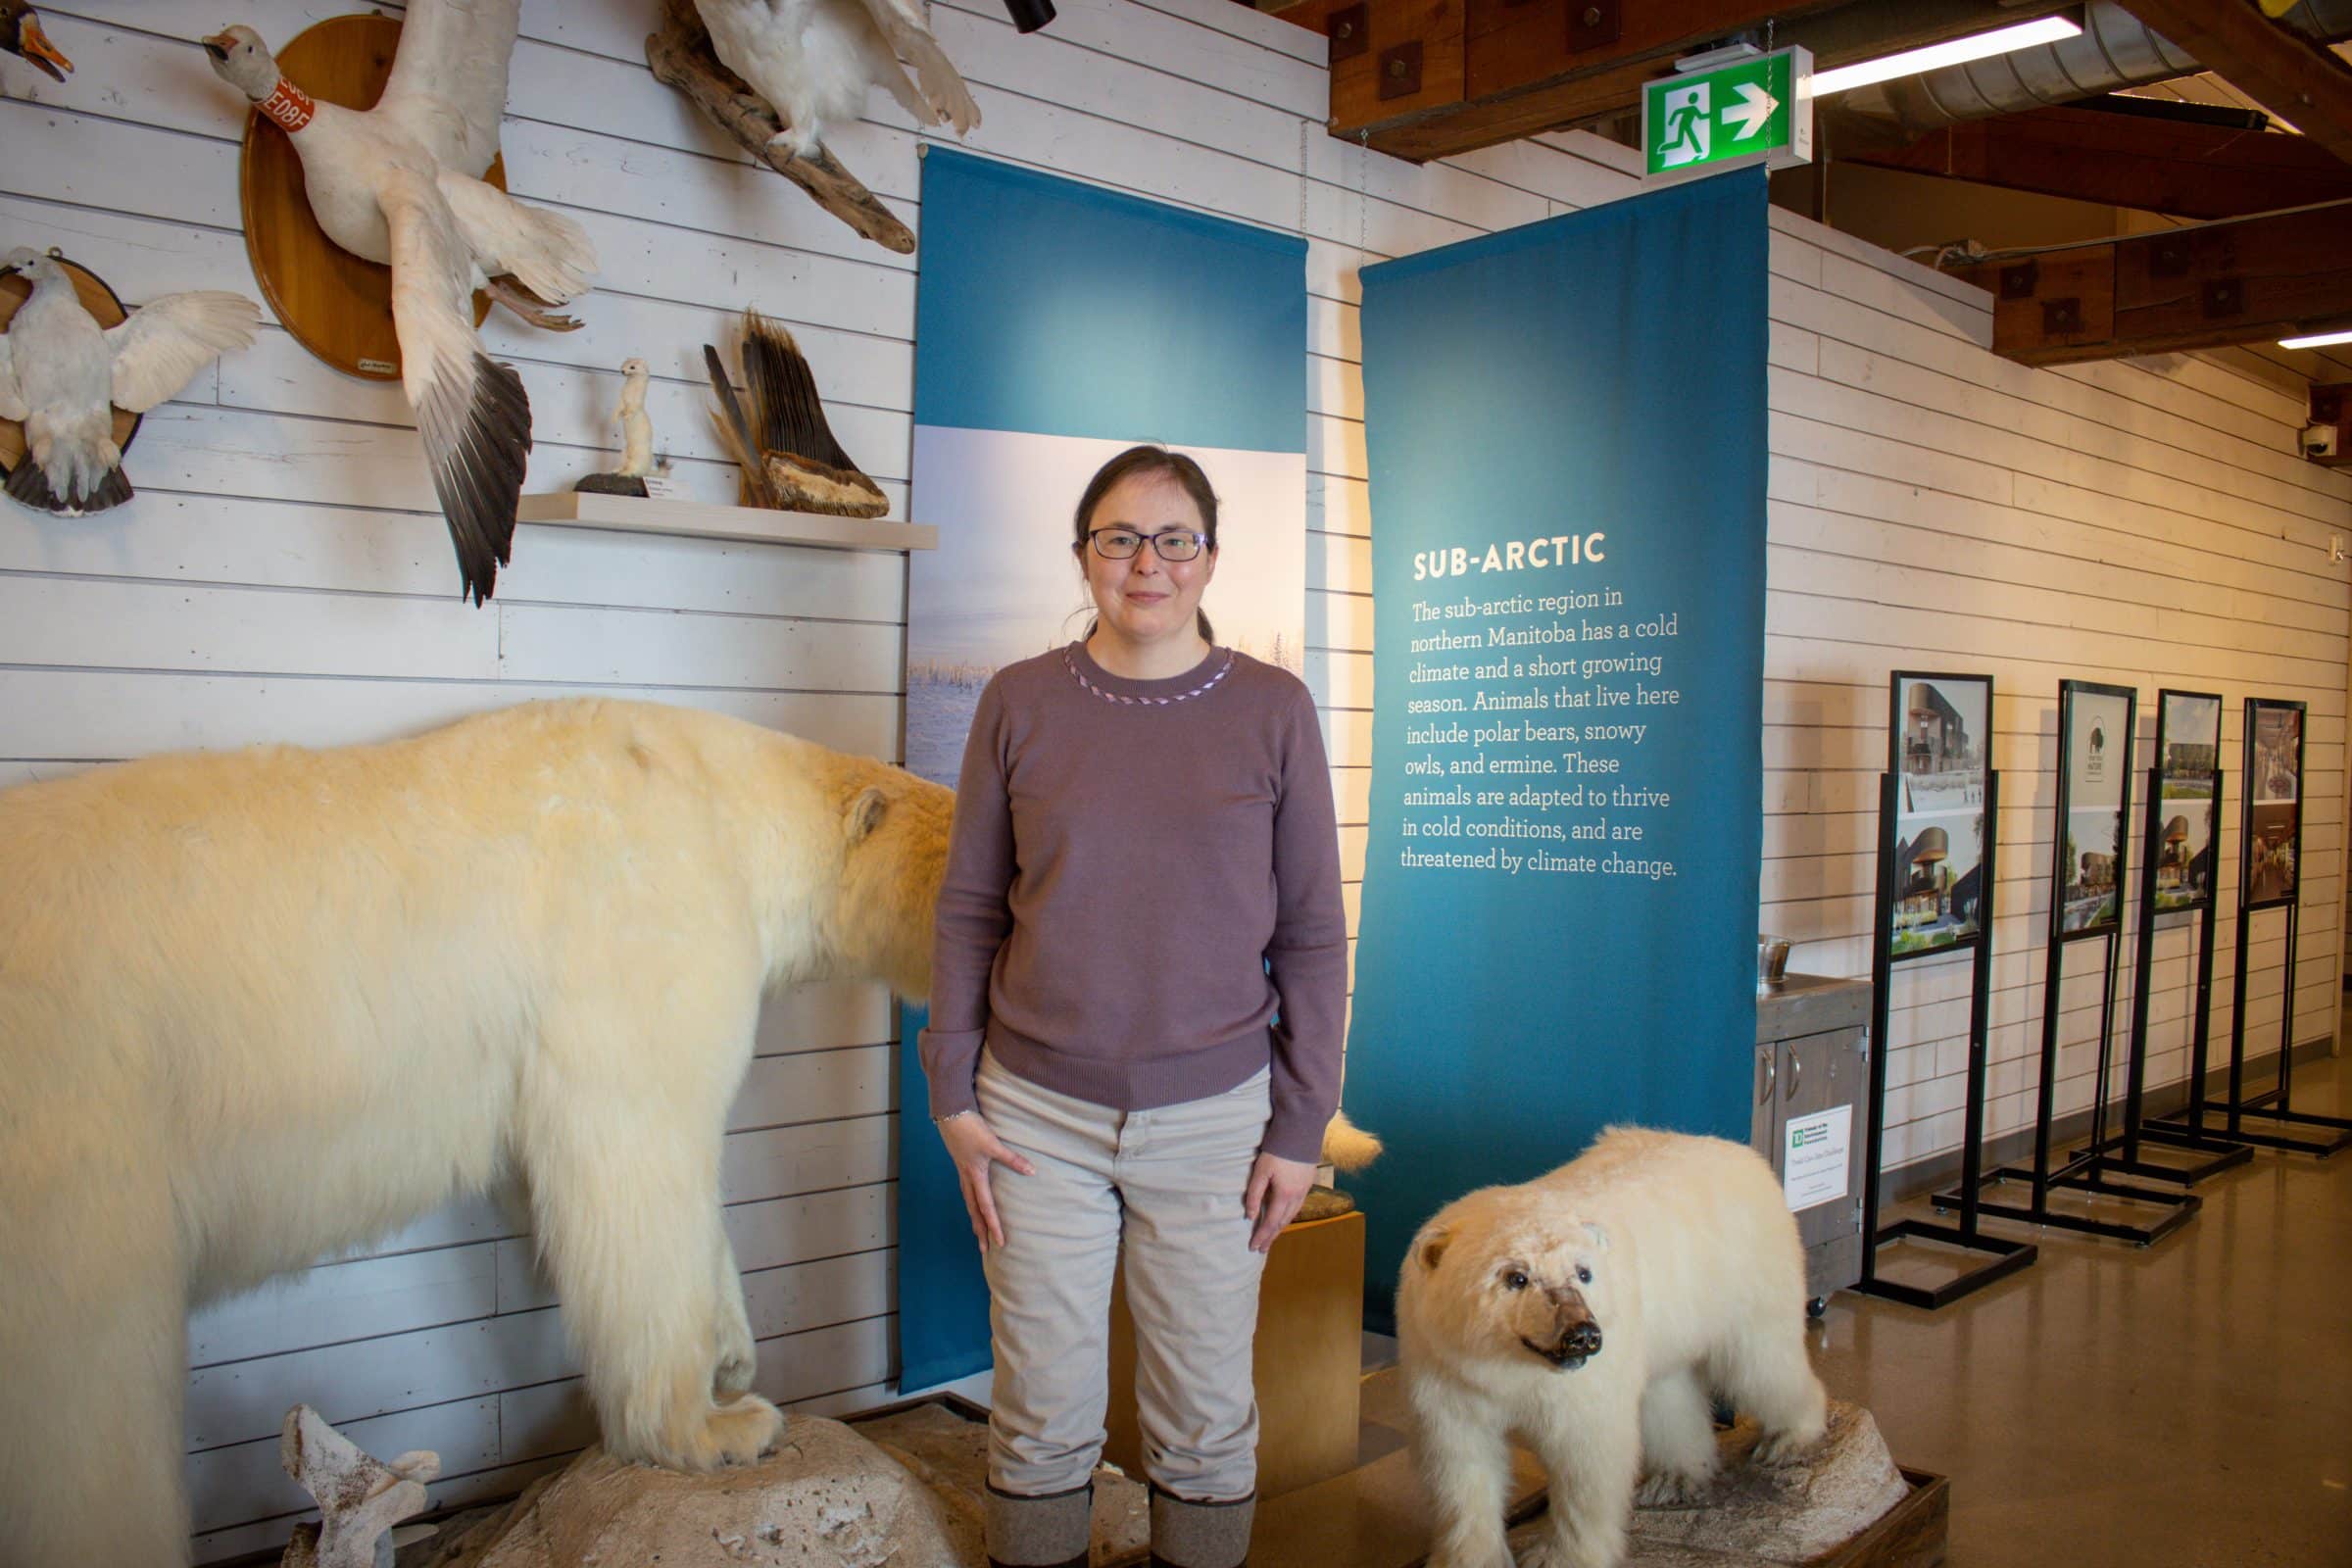 Erin stands in touch museum in front of taxidermy polar bears and informational banner reading "arctic".